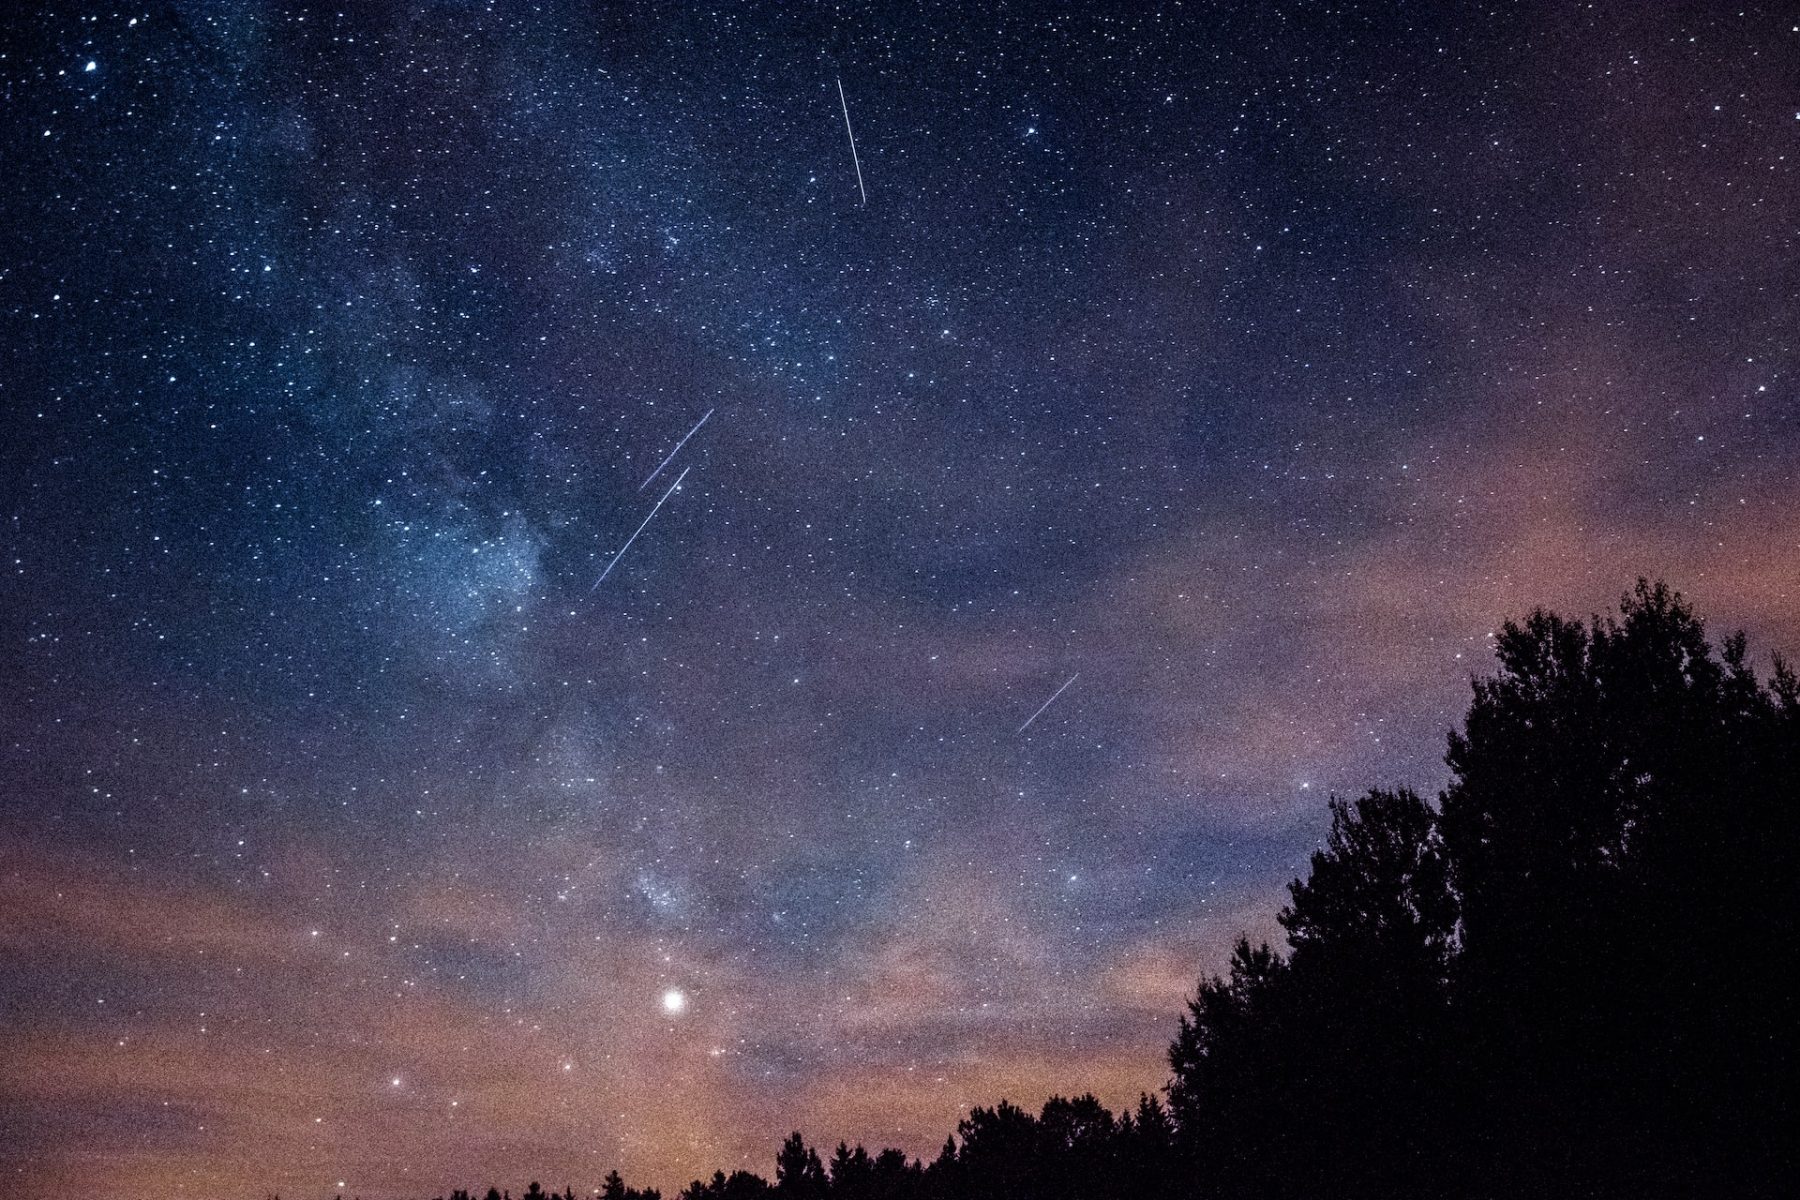 A photo of a meteor shower.